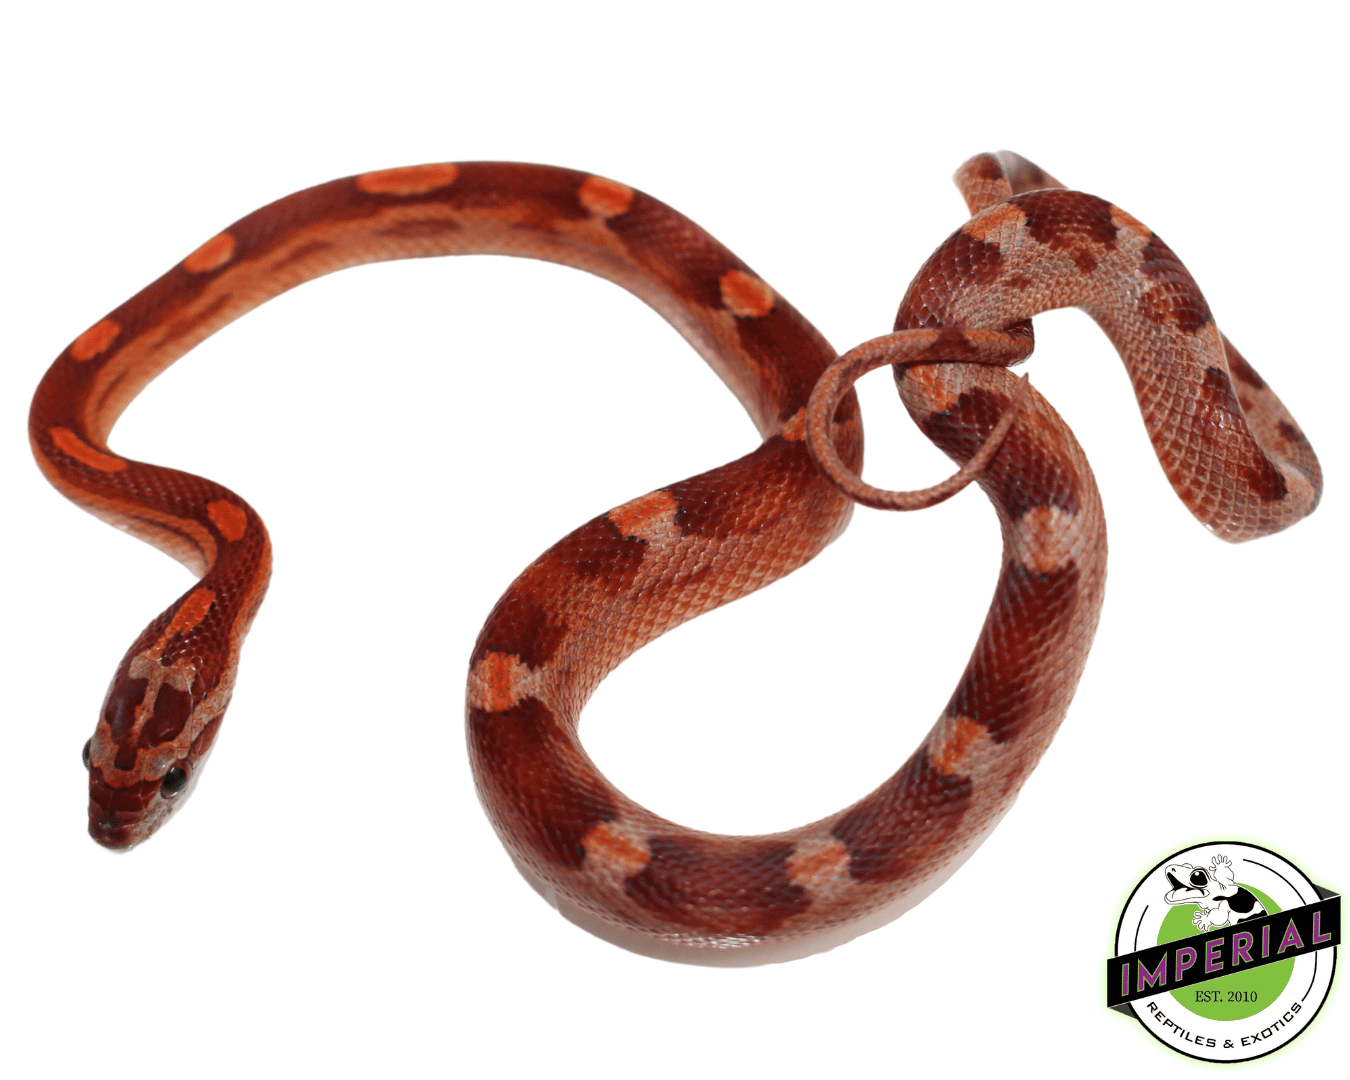 motley Corn Snake for sale, buy reptiles online at cheap prices